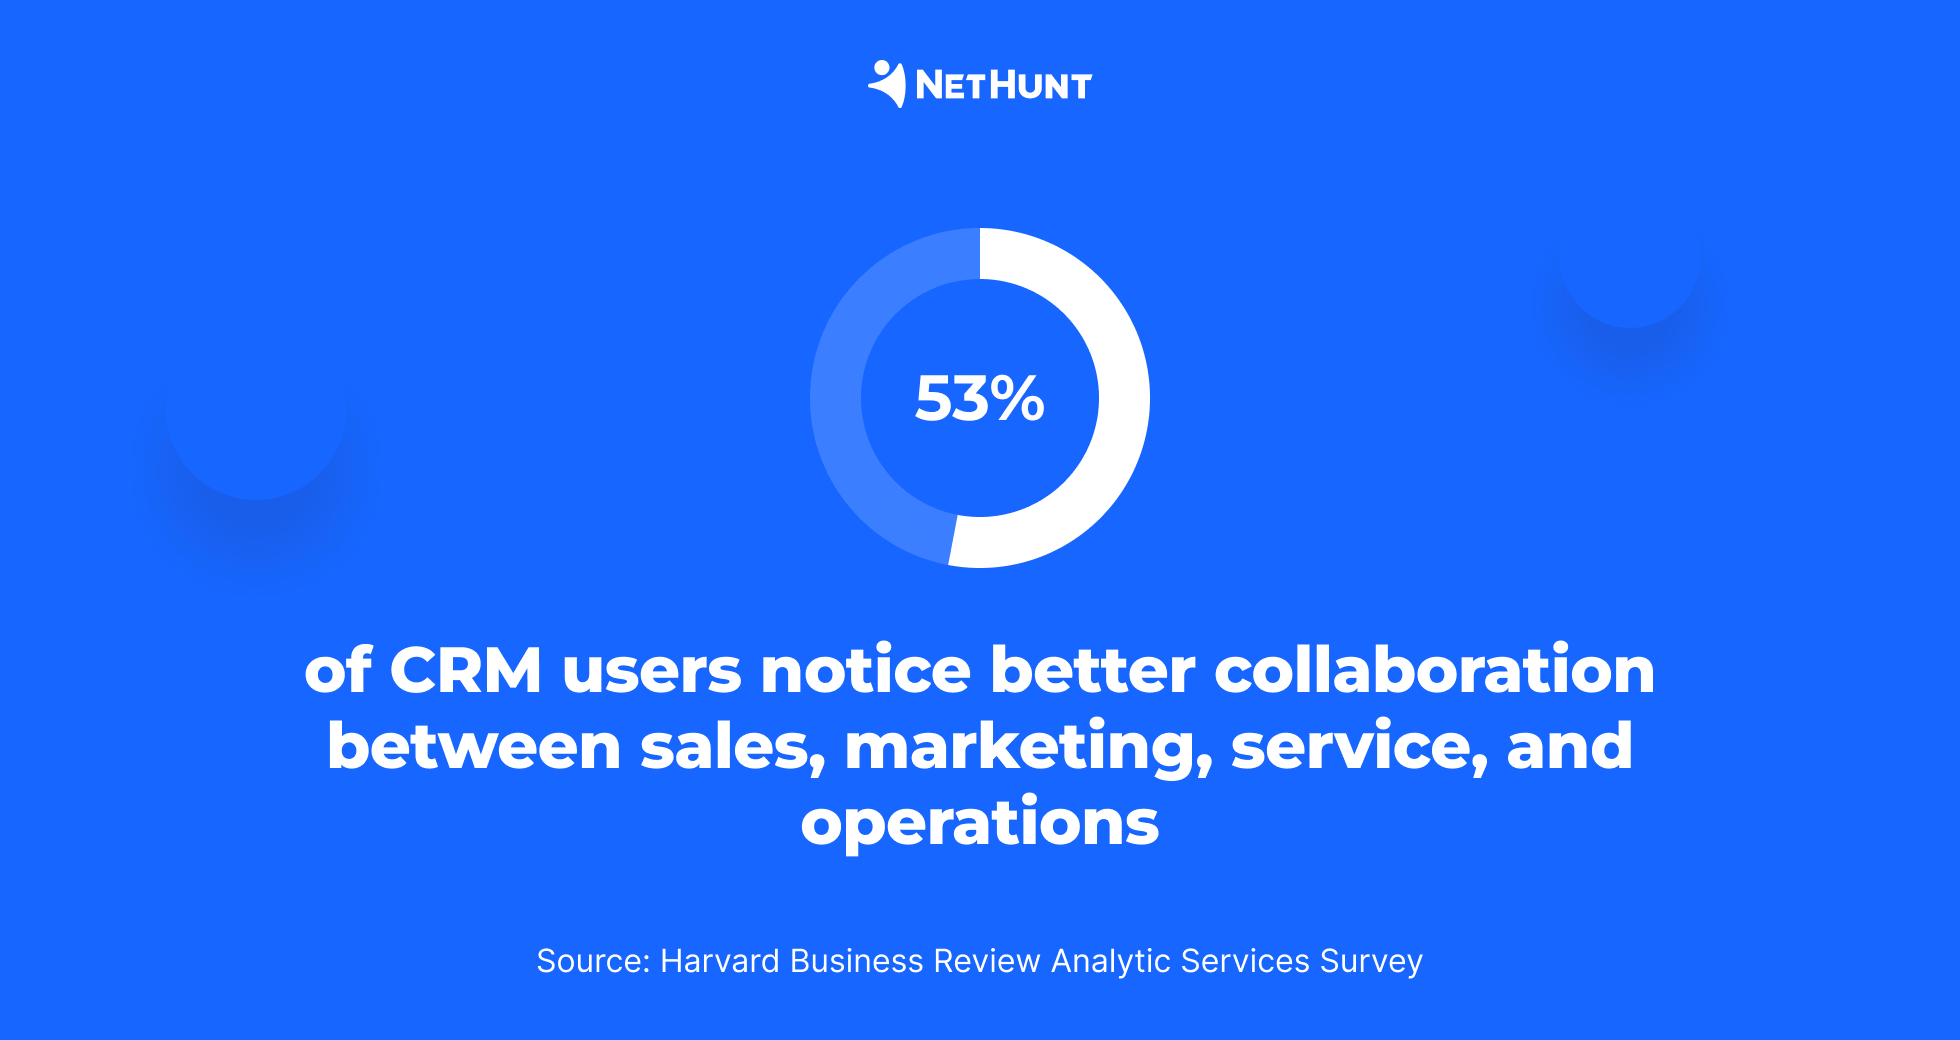 53% of CRM users notice better collaboration between different departments